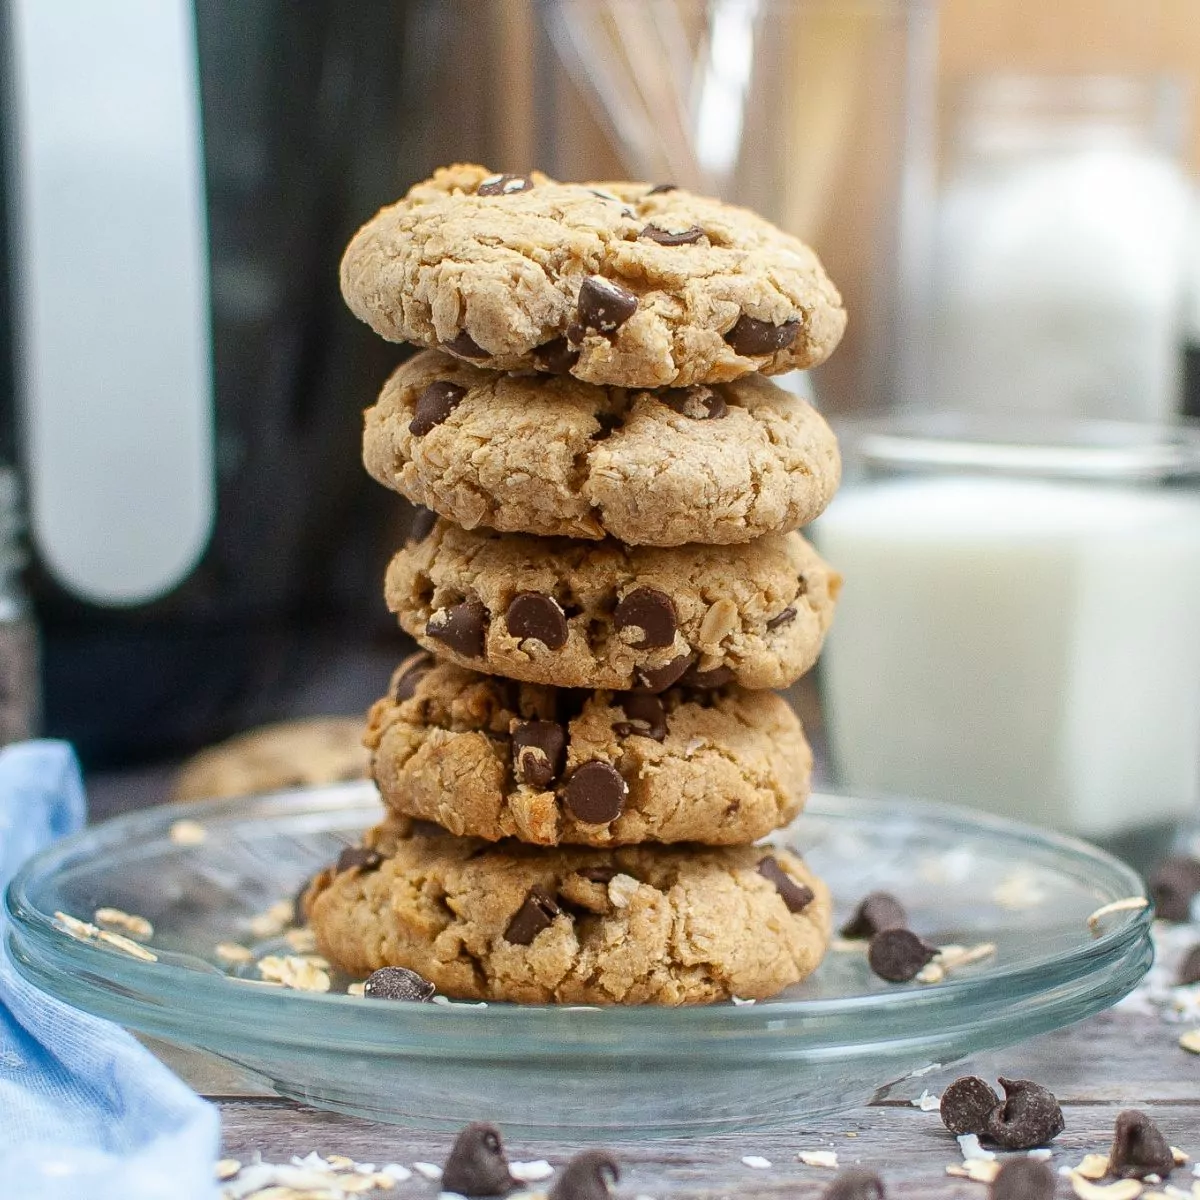 stacked cookies made in an air fryer on plate.